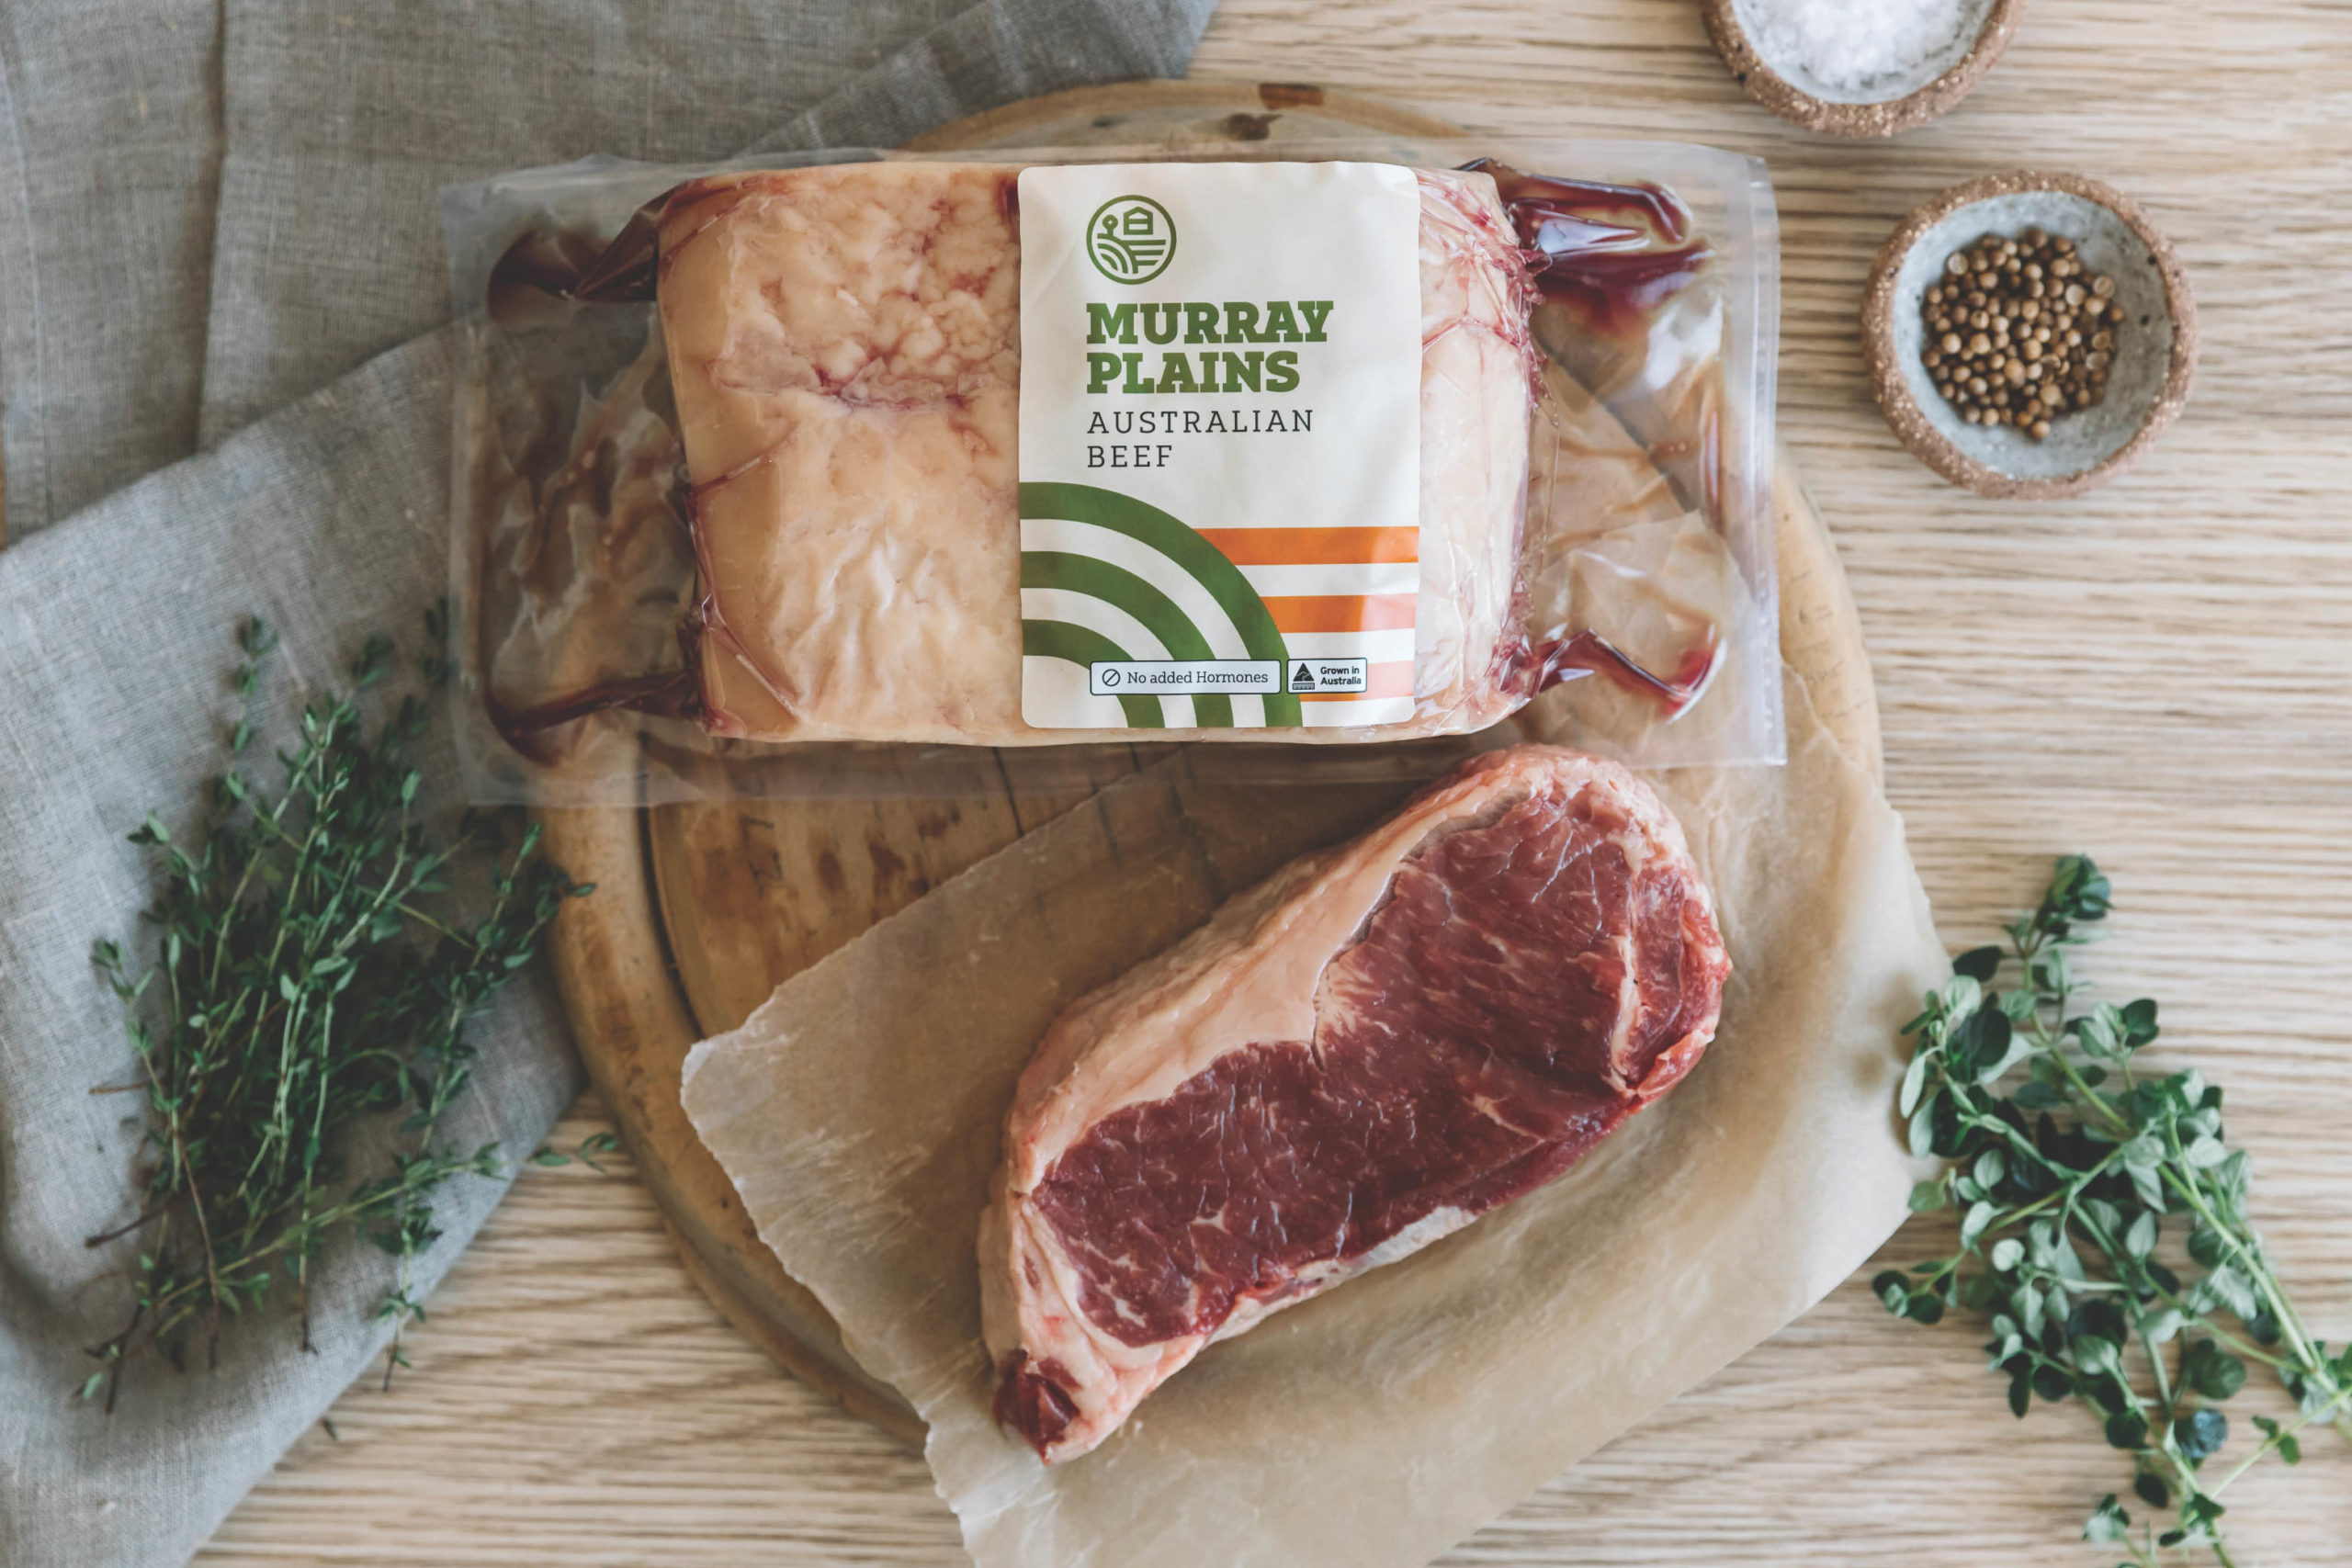 Murray Plains Australian Beef Shrink Wrap packaging, resting on a wooden table, with various ingredients surrounding the raw meat.